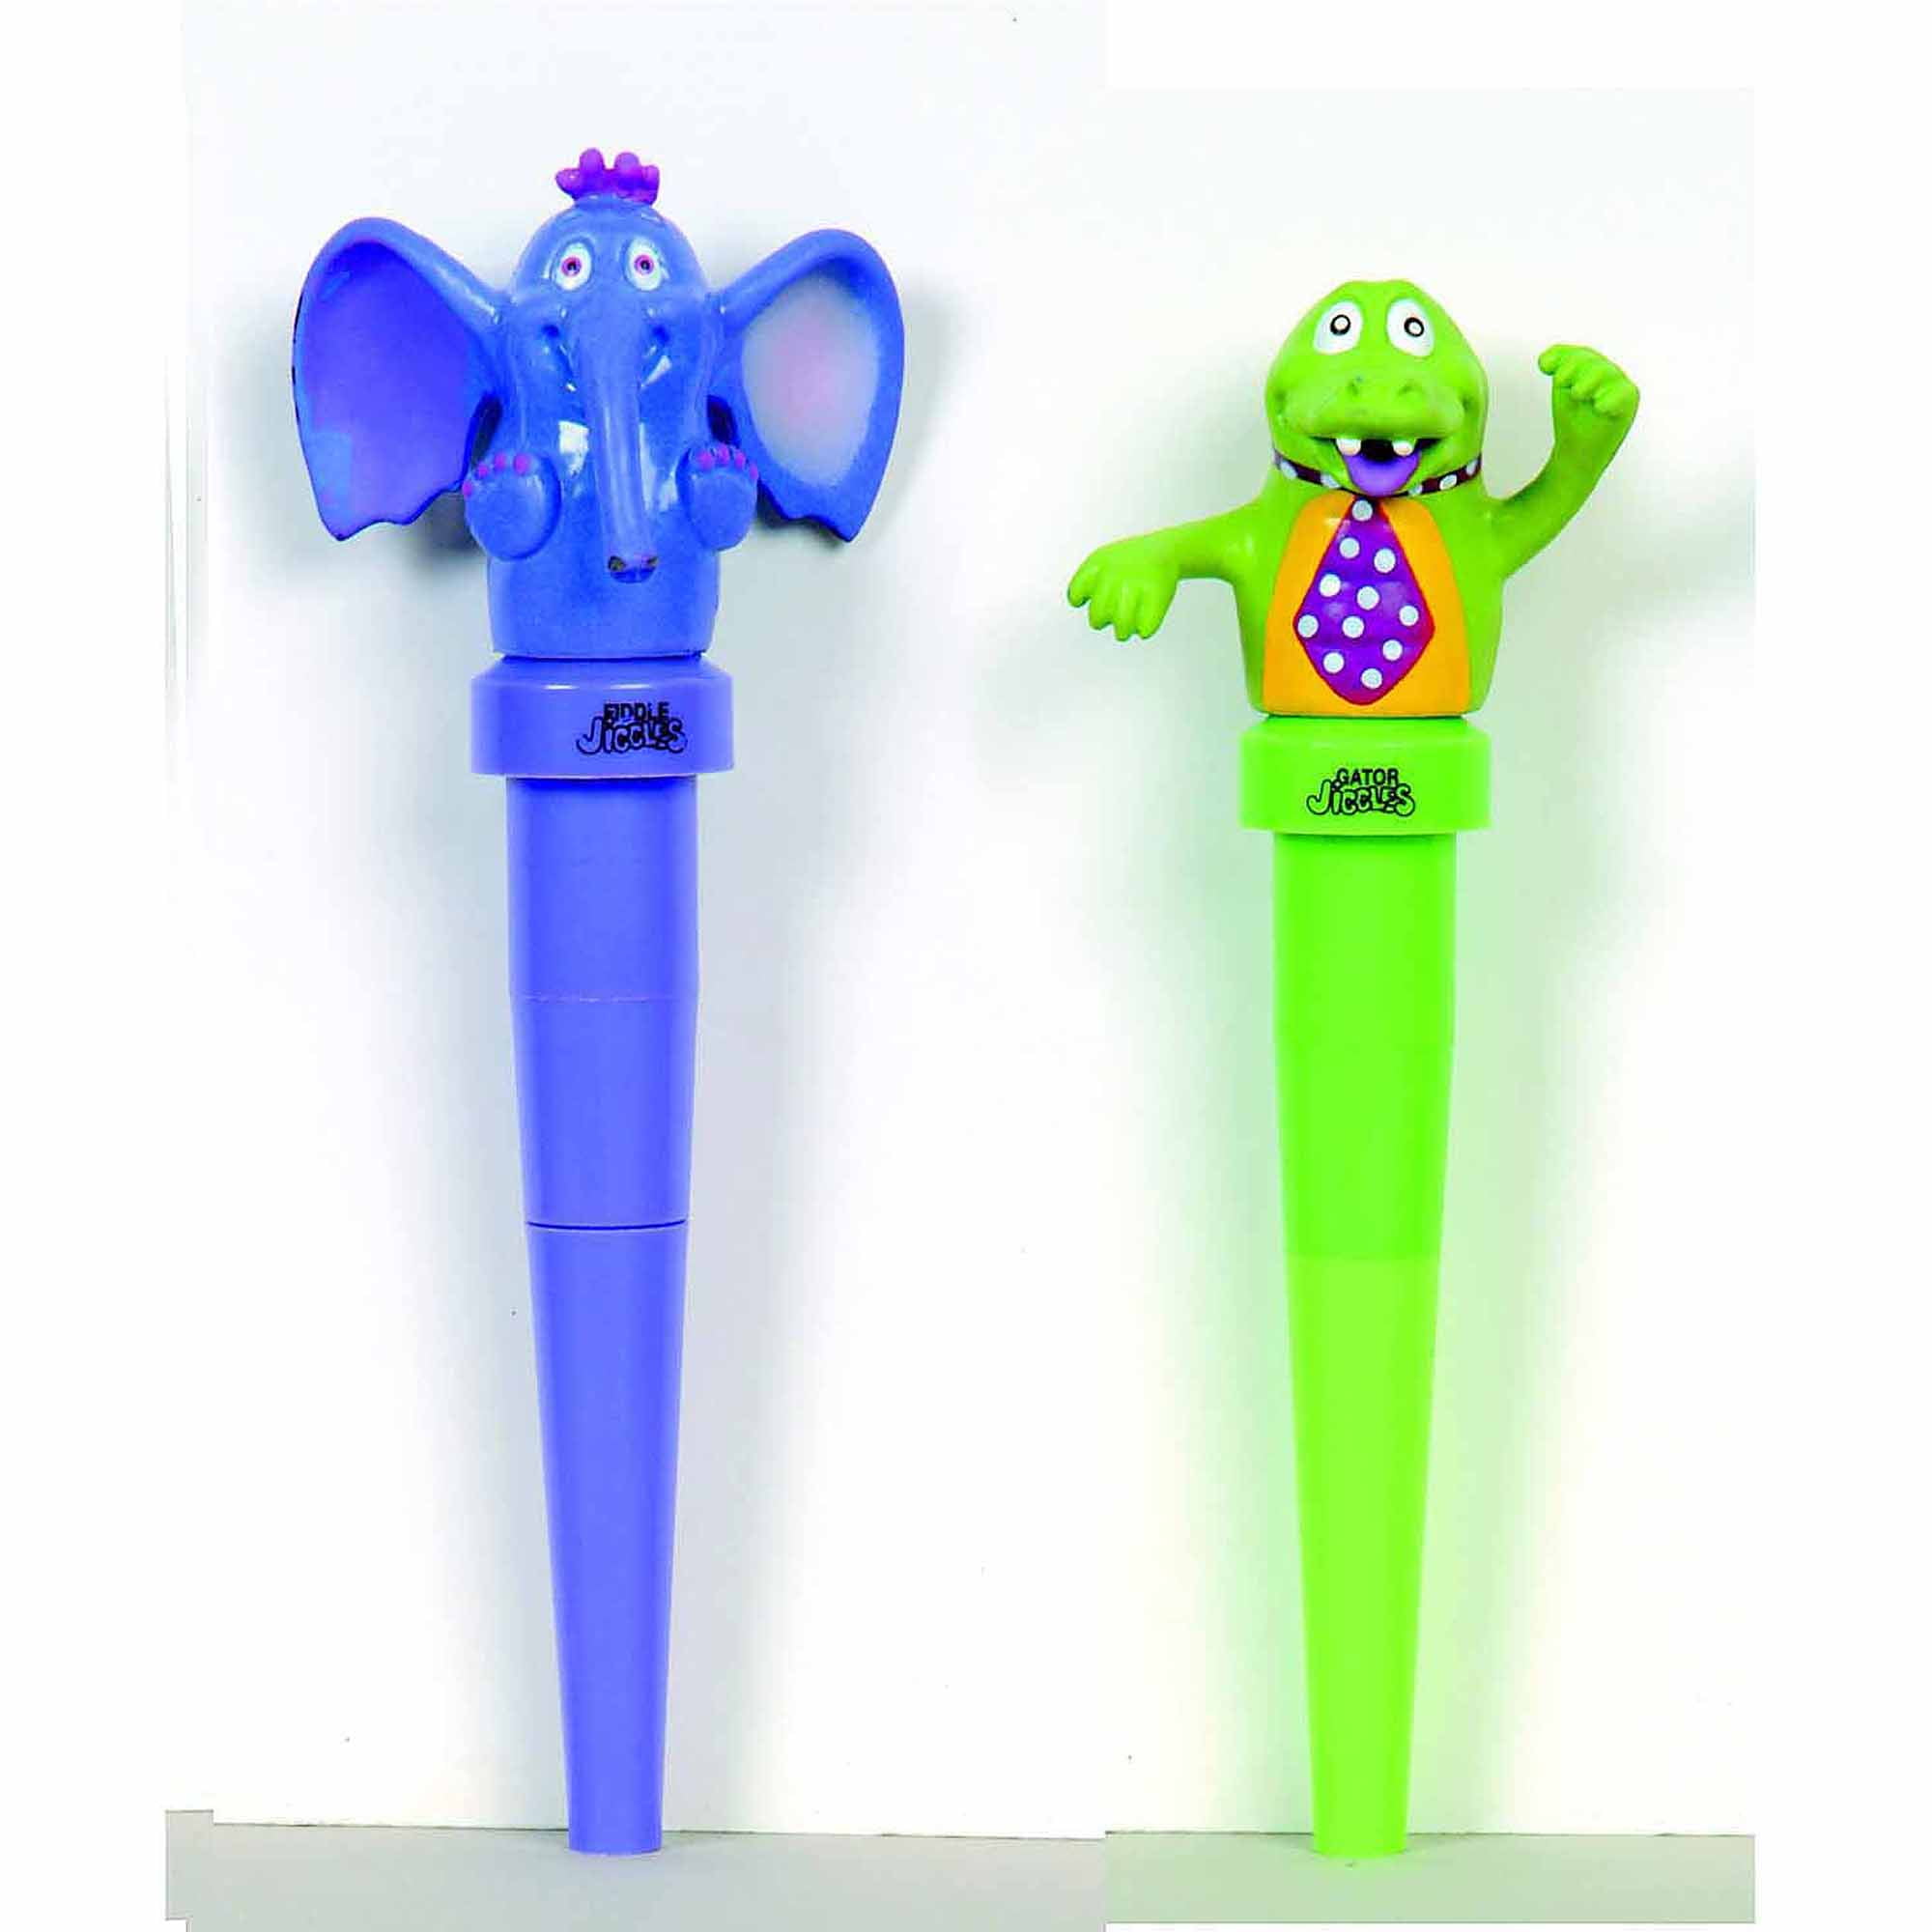 Abilitations Jigglers Massager Elephant and Gator Chewable Oral Massager Pair of 2